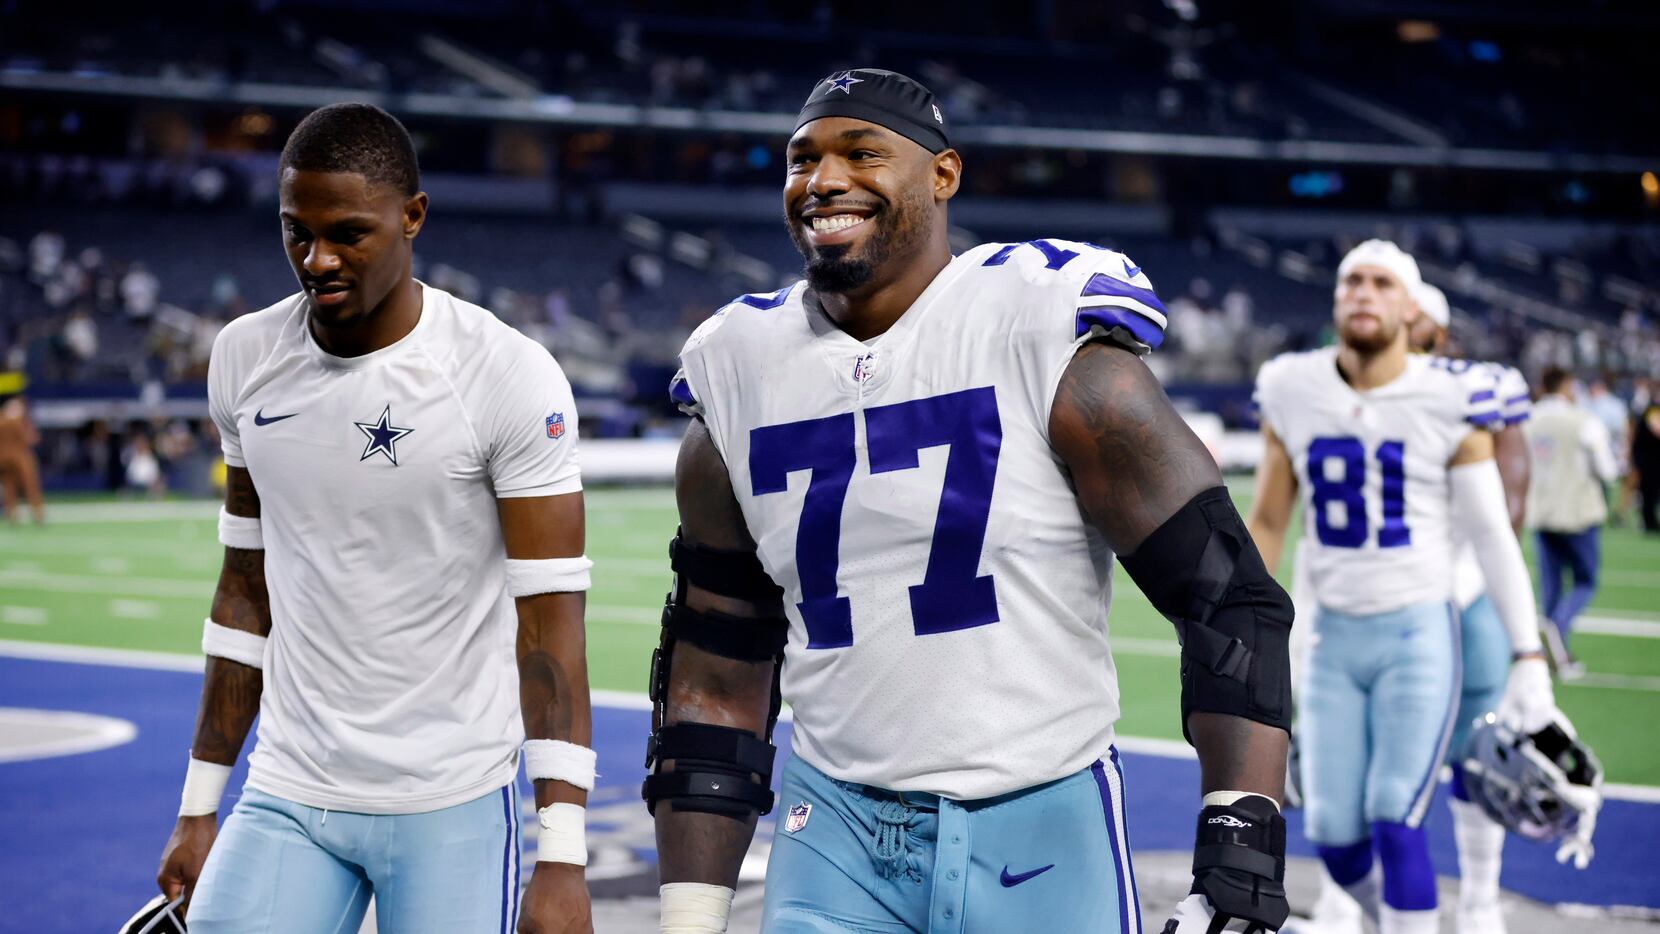 Cowboys optimistic LT Tyron Smith (neck) will be able to play vs. Patriots